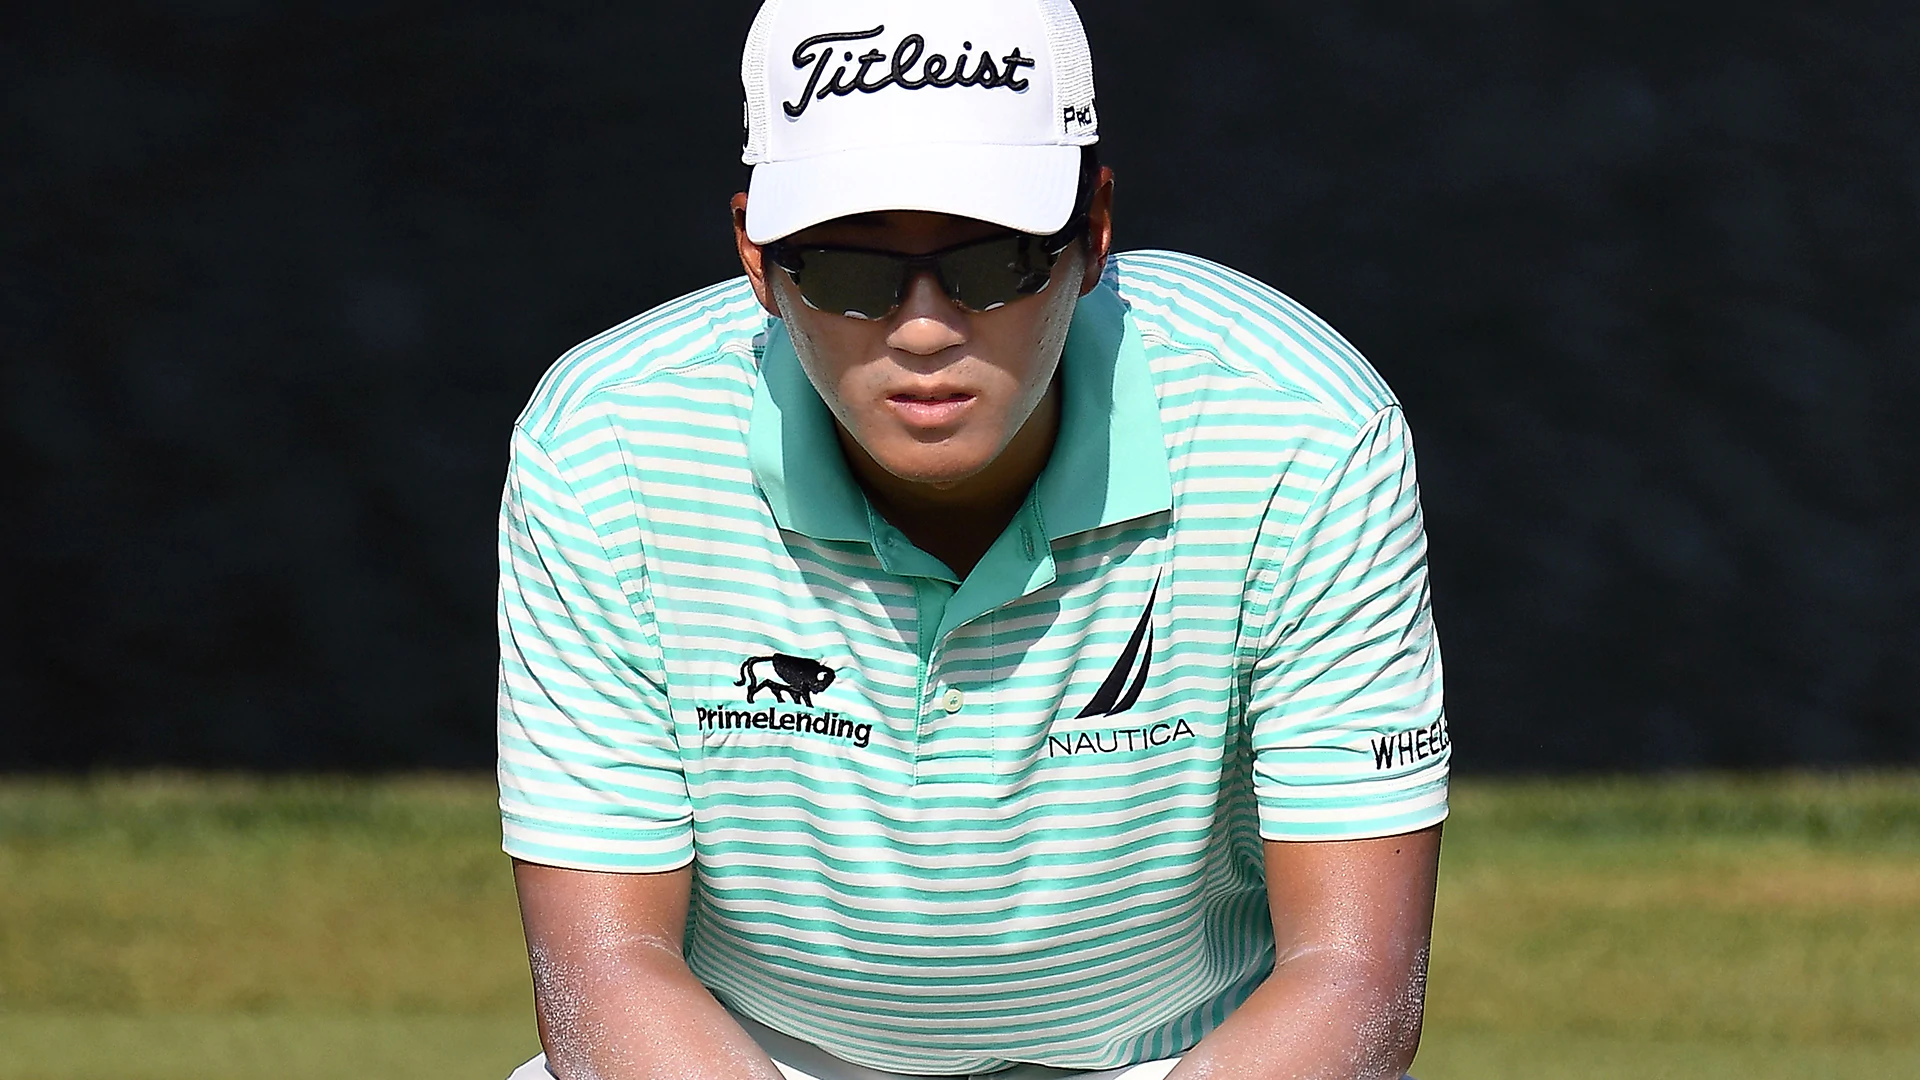 Kim finishes second round with bogey, leads by 3